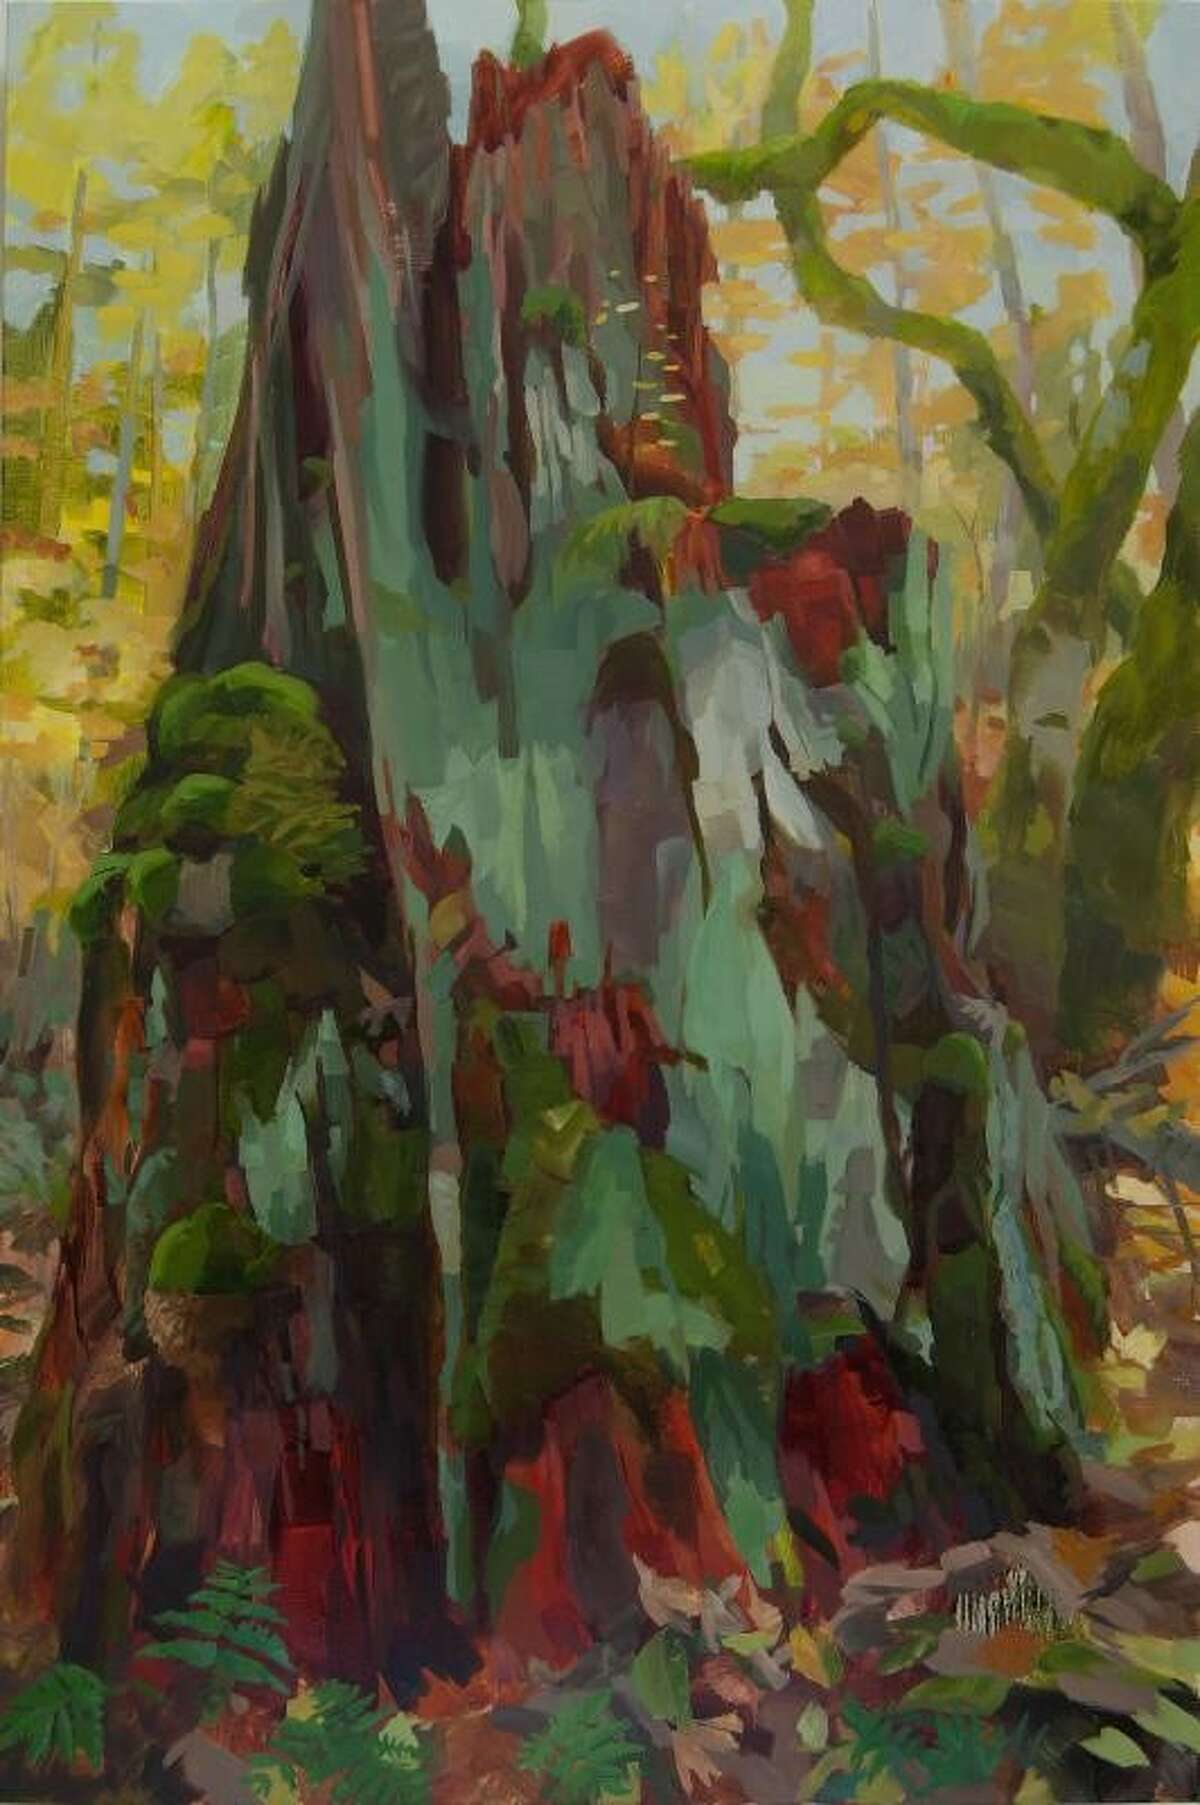 "Big Stump" is among paintings by Kristin Musgnug on view May 20-June 25 at Inman Gallery.﻿